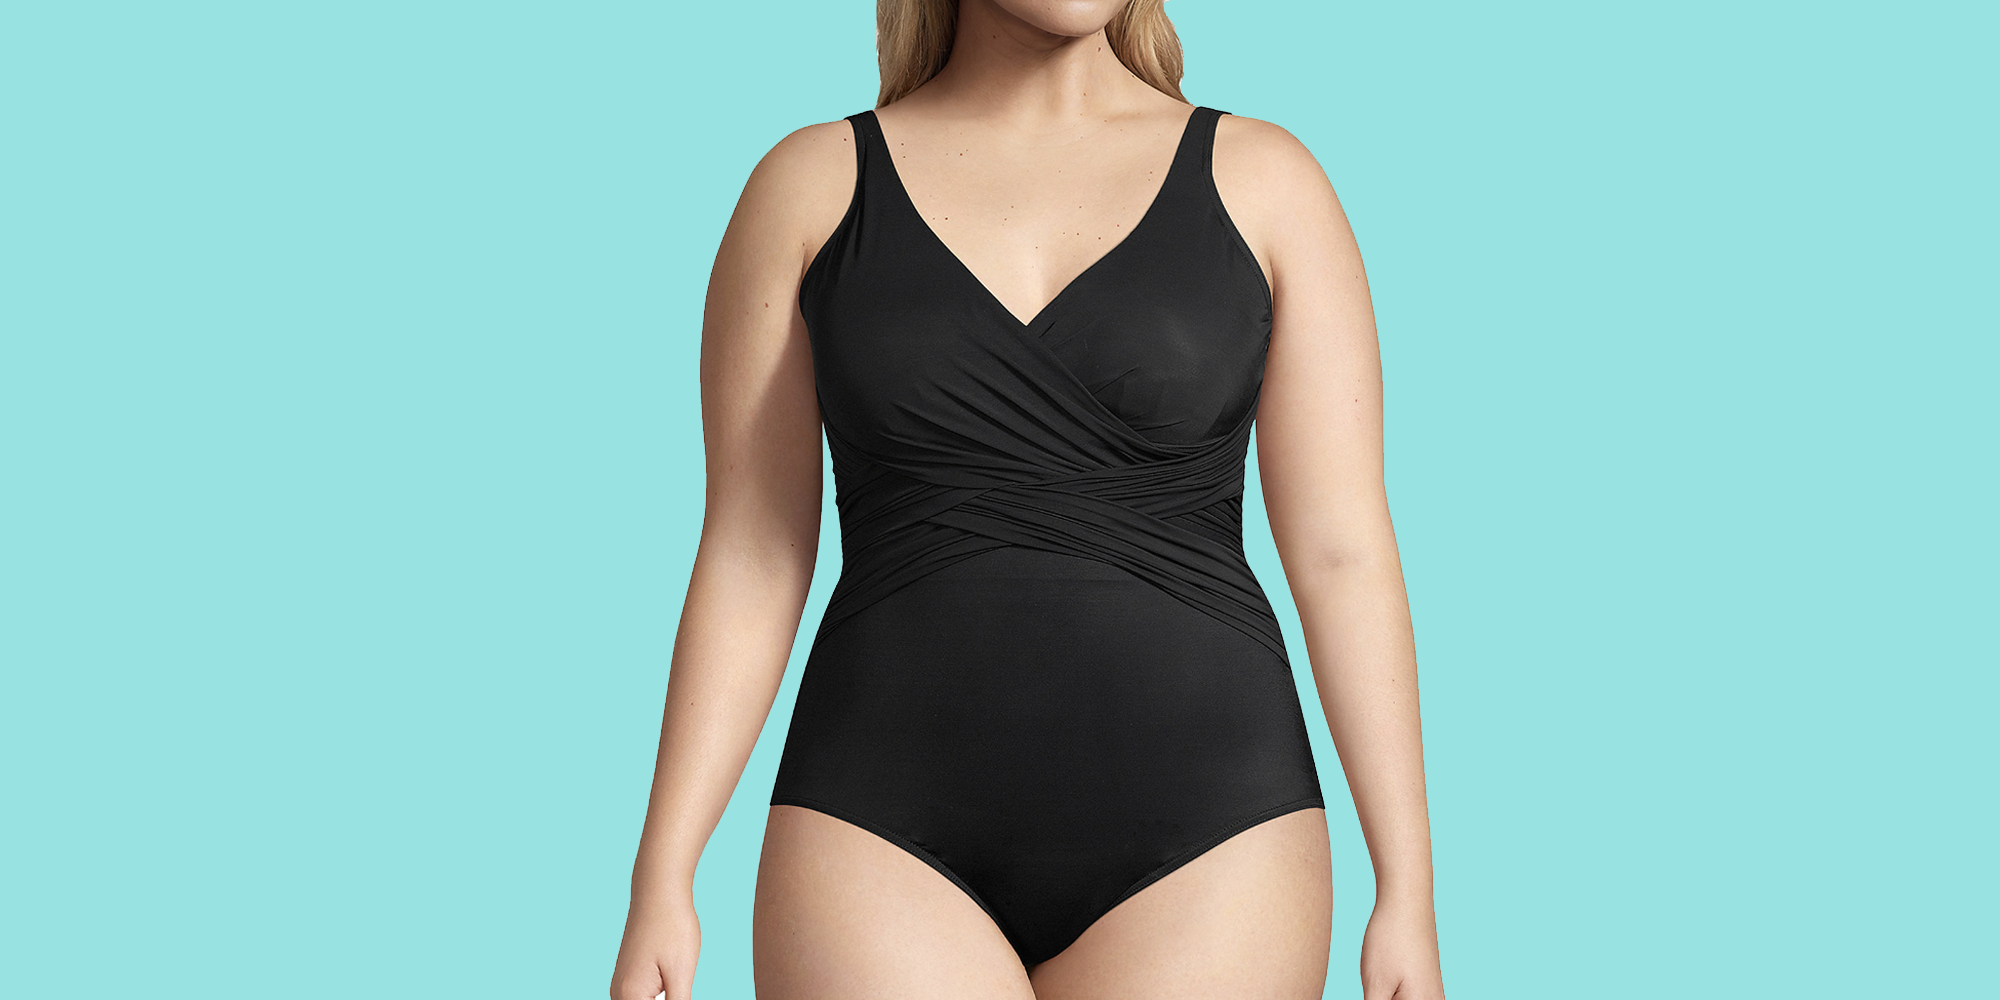 If you've been searching for supportive swimwear look no further with this  non-padded, underwired balconette tankini!